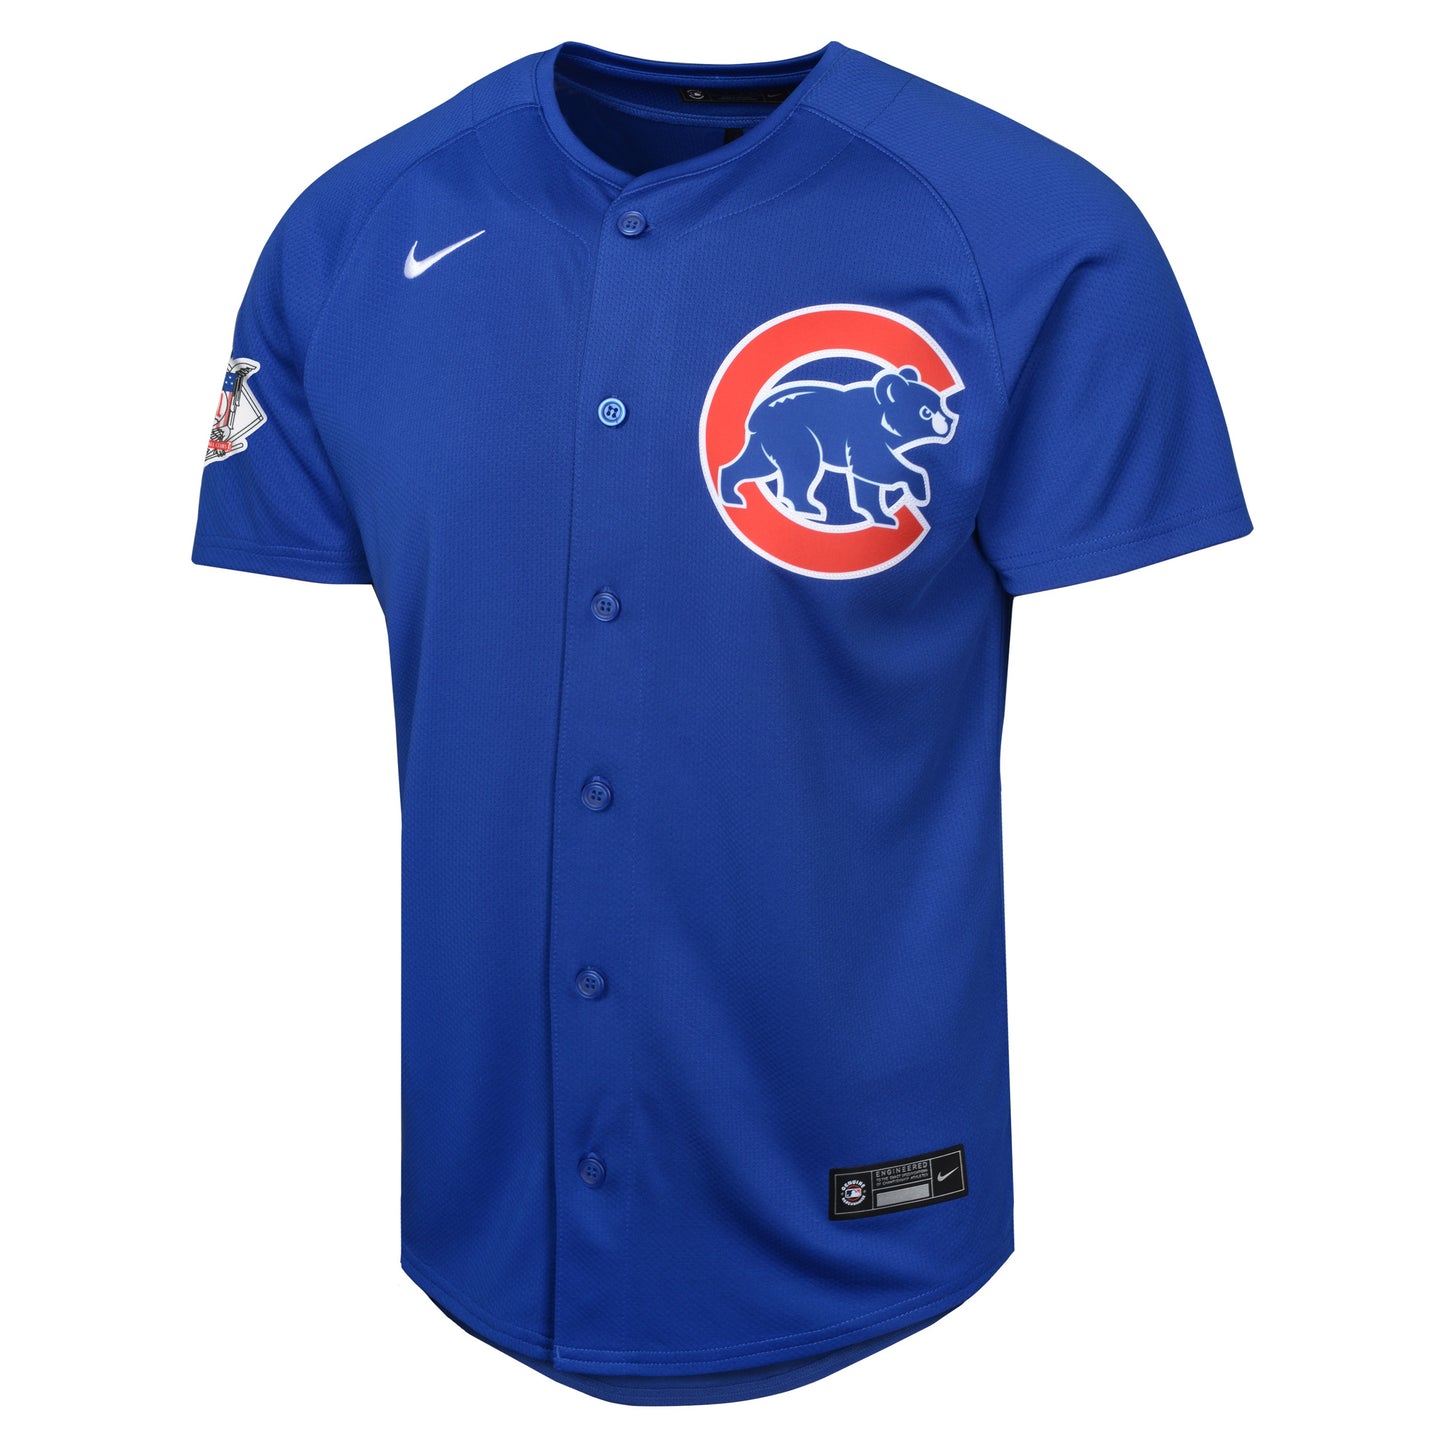 Youth Chicago Cubs NIKE Blue Alternate Limited Blank Replica Jersey